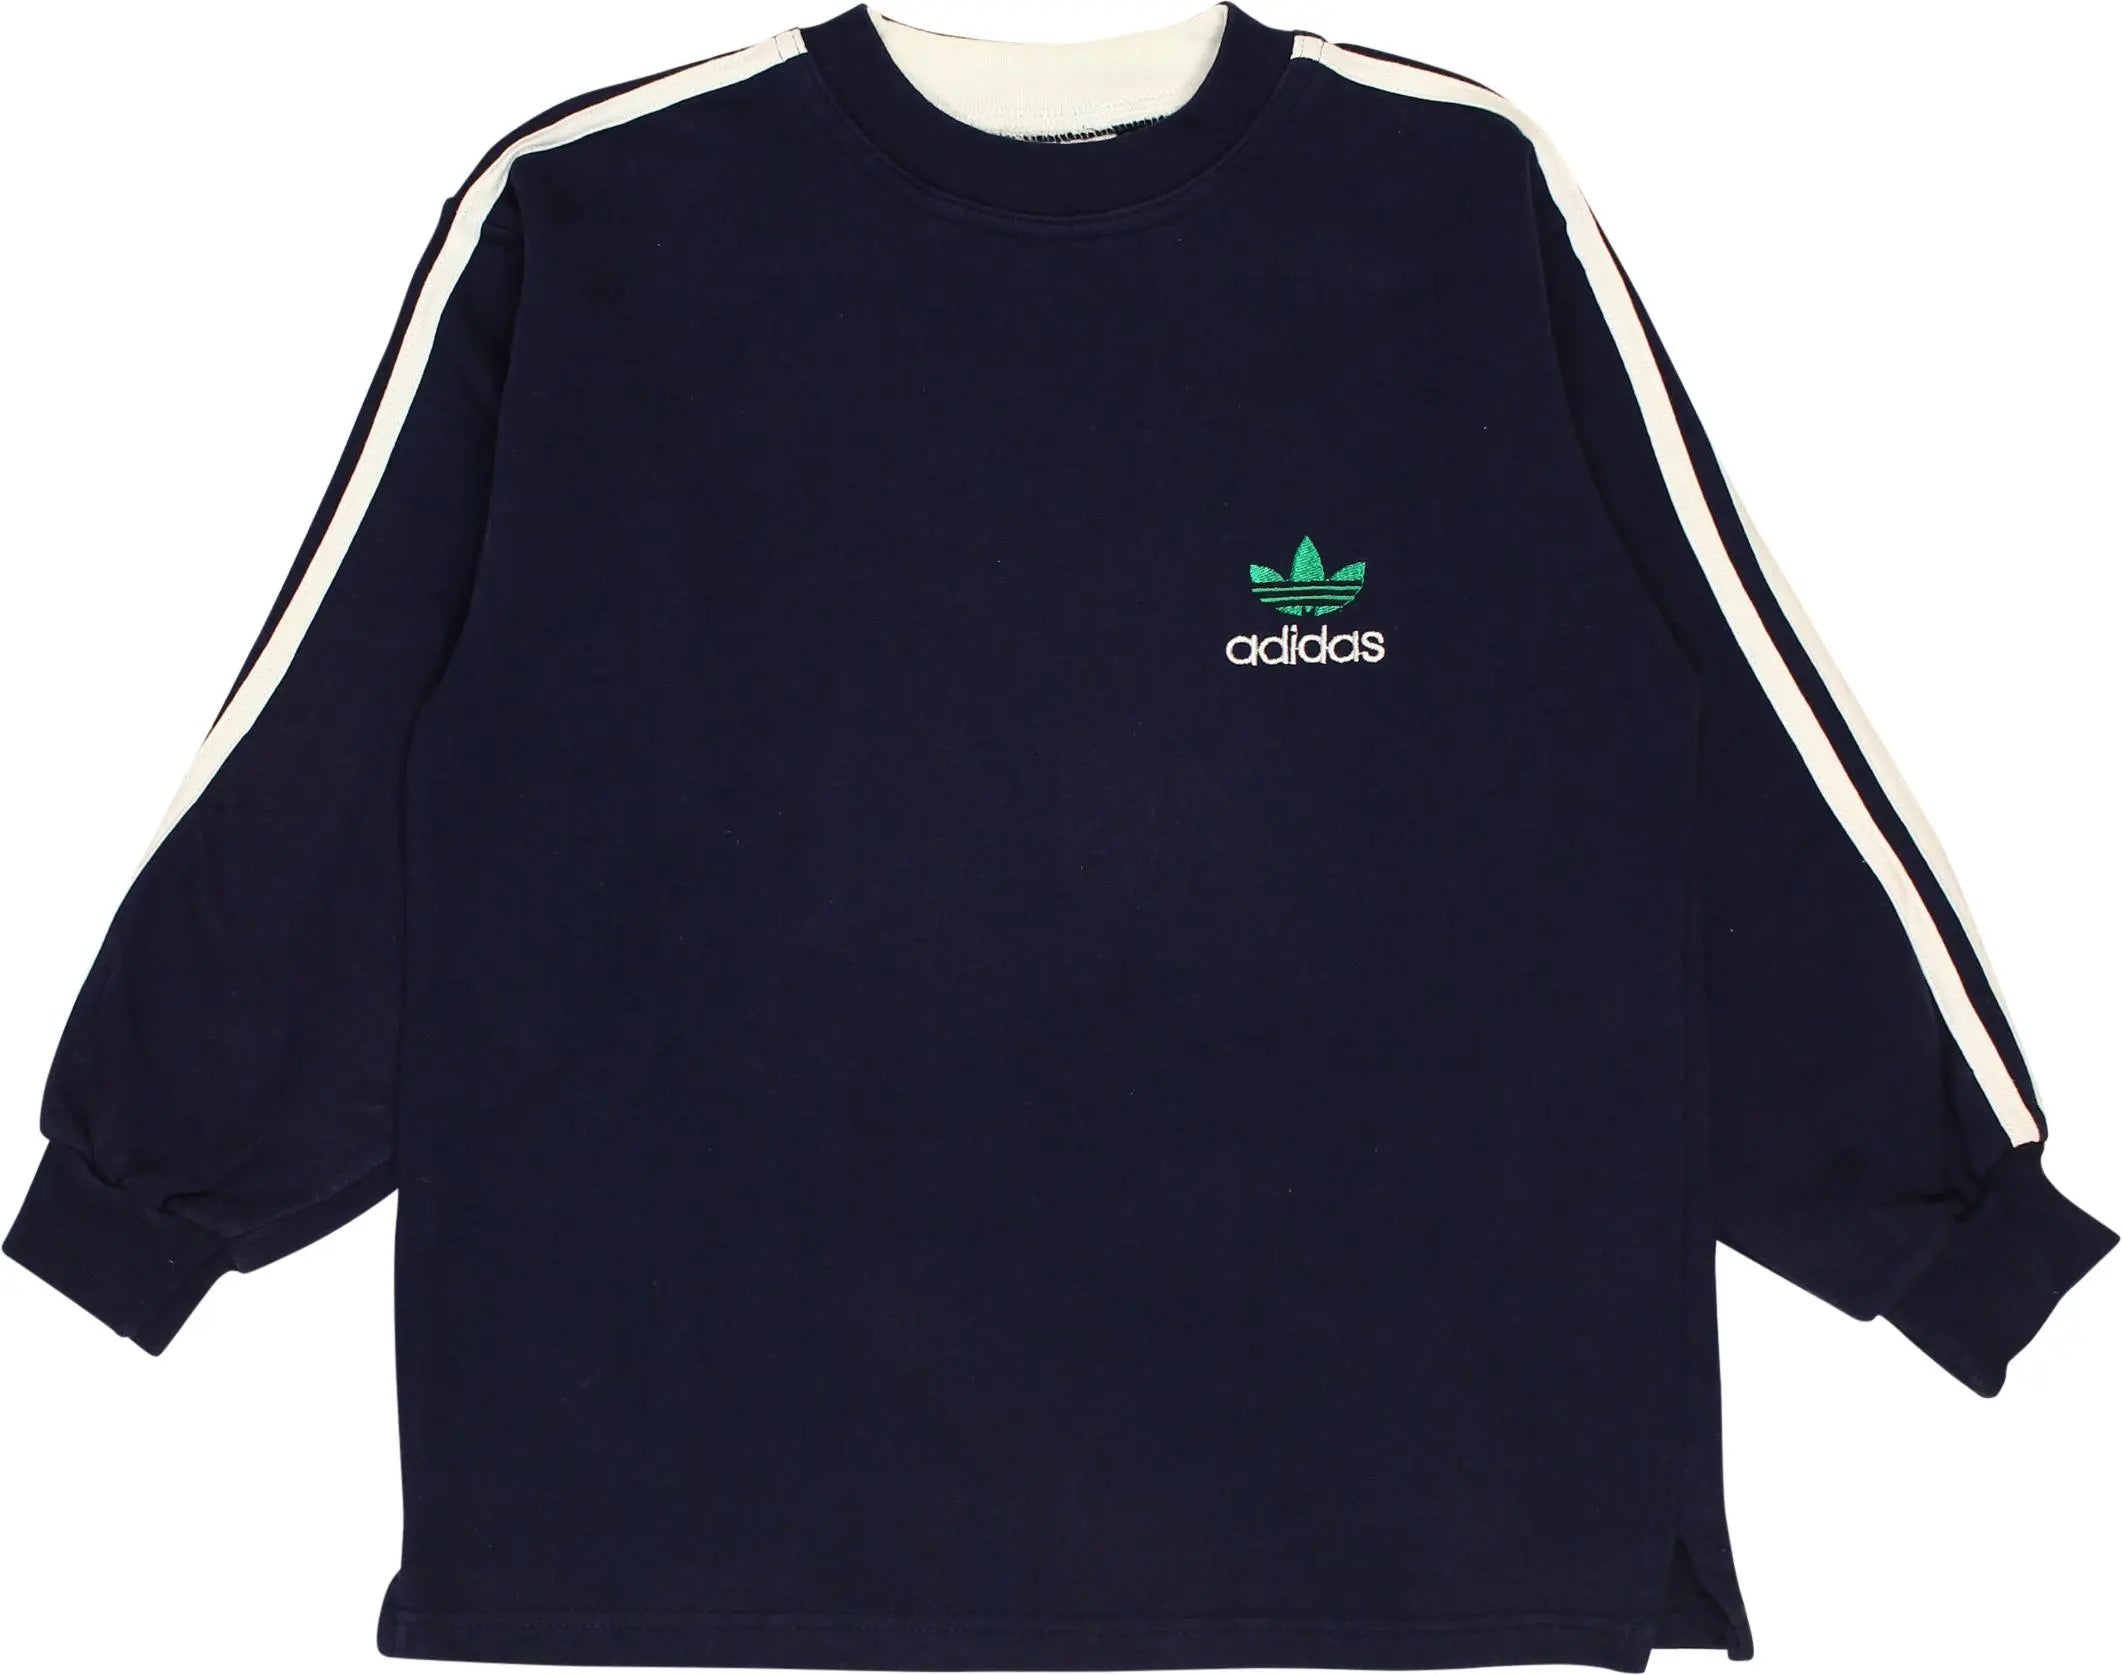 Adidas - 80s Adidas Sweater- ThriftTale.com - Vintage and second handclothing